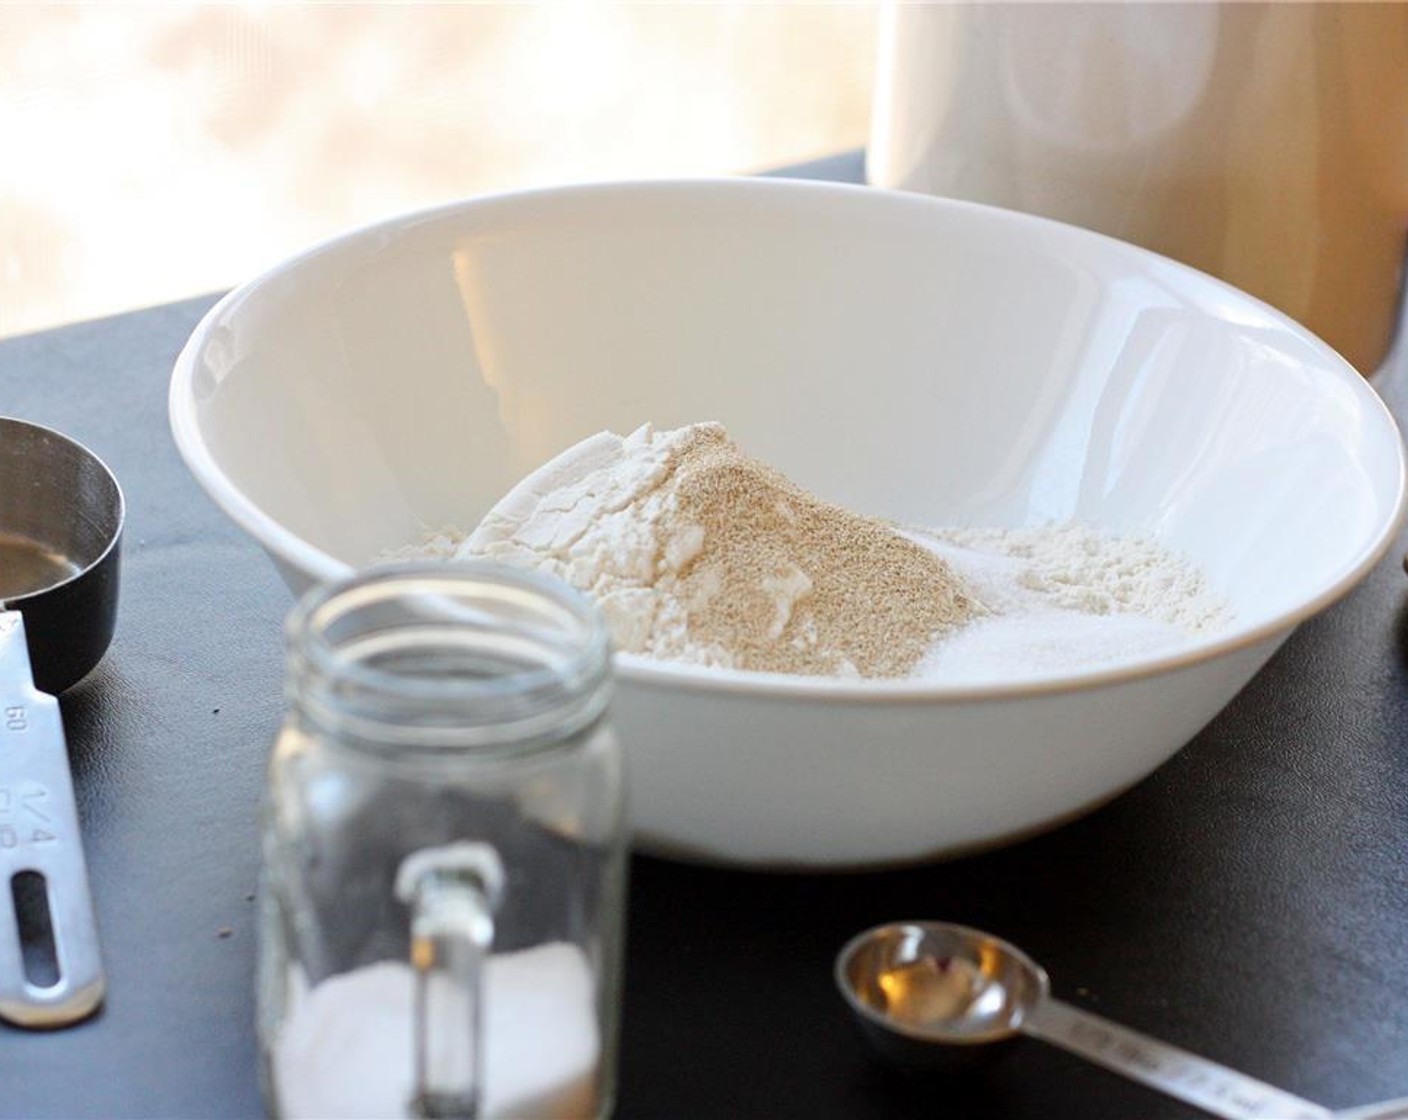 step 3 Sift together the All-Purpose Flour (1 1/2 cups), Granulated Sugar (1 Tbsp), Instant Dry Yeast (1/2 Tbsp), and Salt (1/2 tsp) into a large bowl.